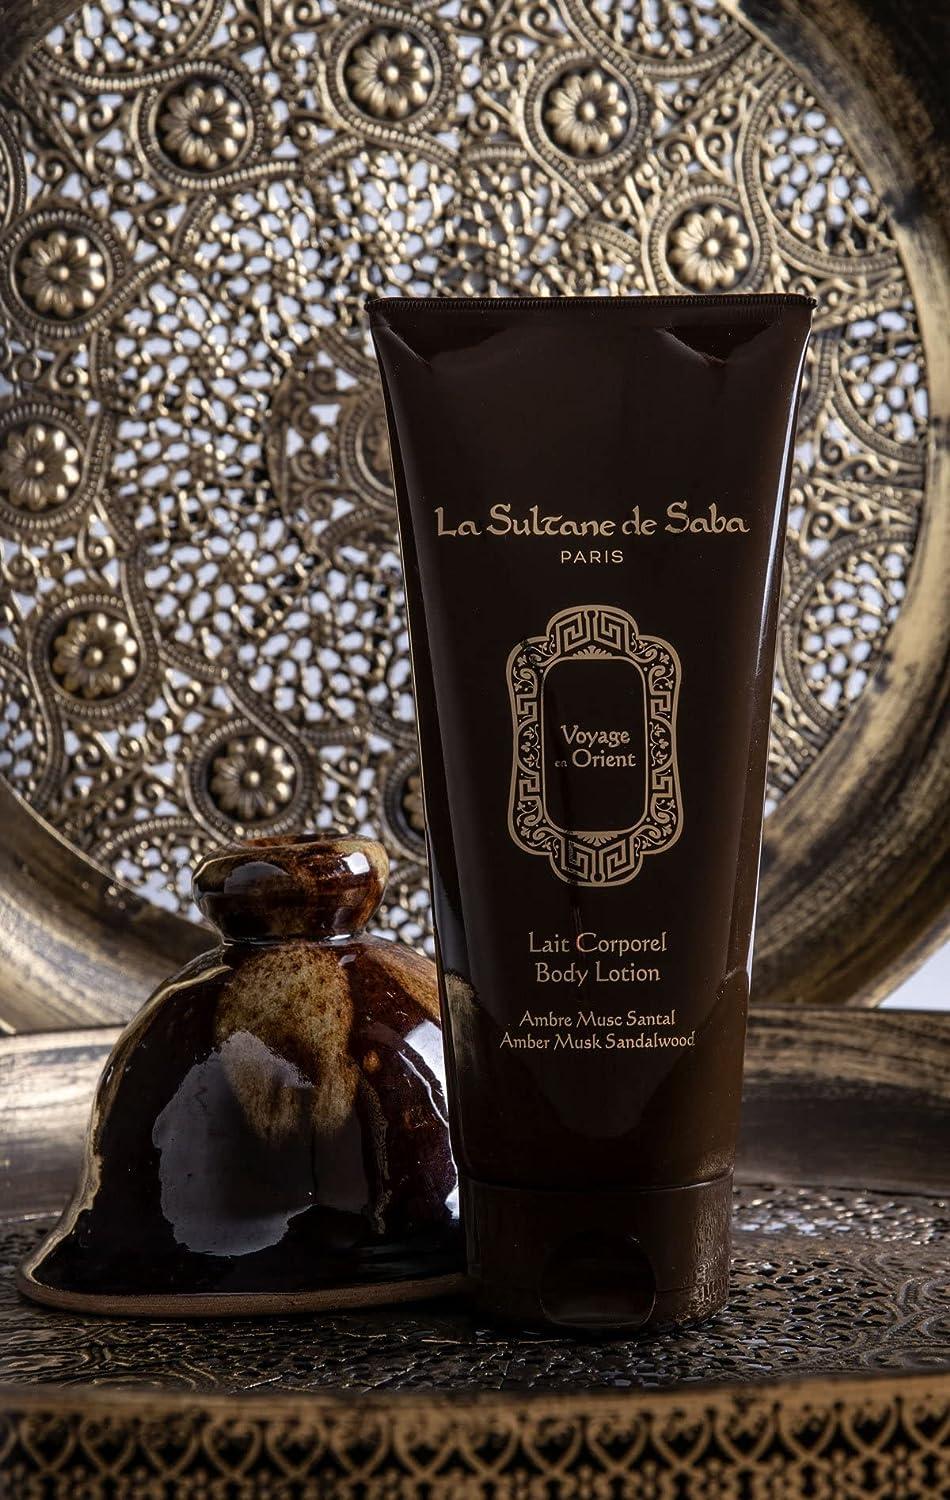 Buy La Sultane de Saba - Body Lotion Amber Vanilla Patchouli scent, 200ml -  Traveling on the road of Spices - Online at desertcartINDIA